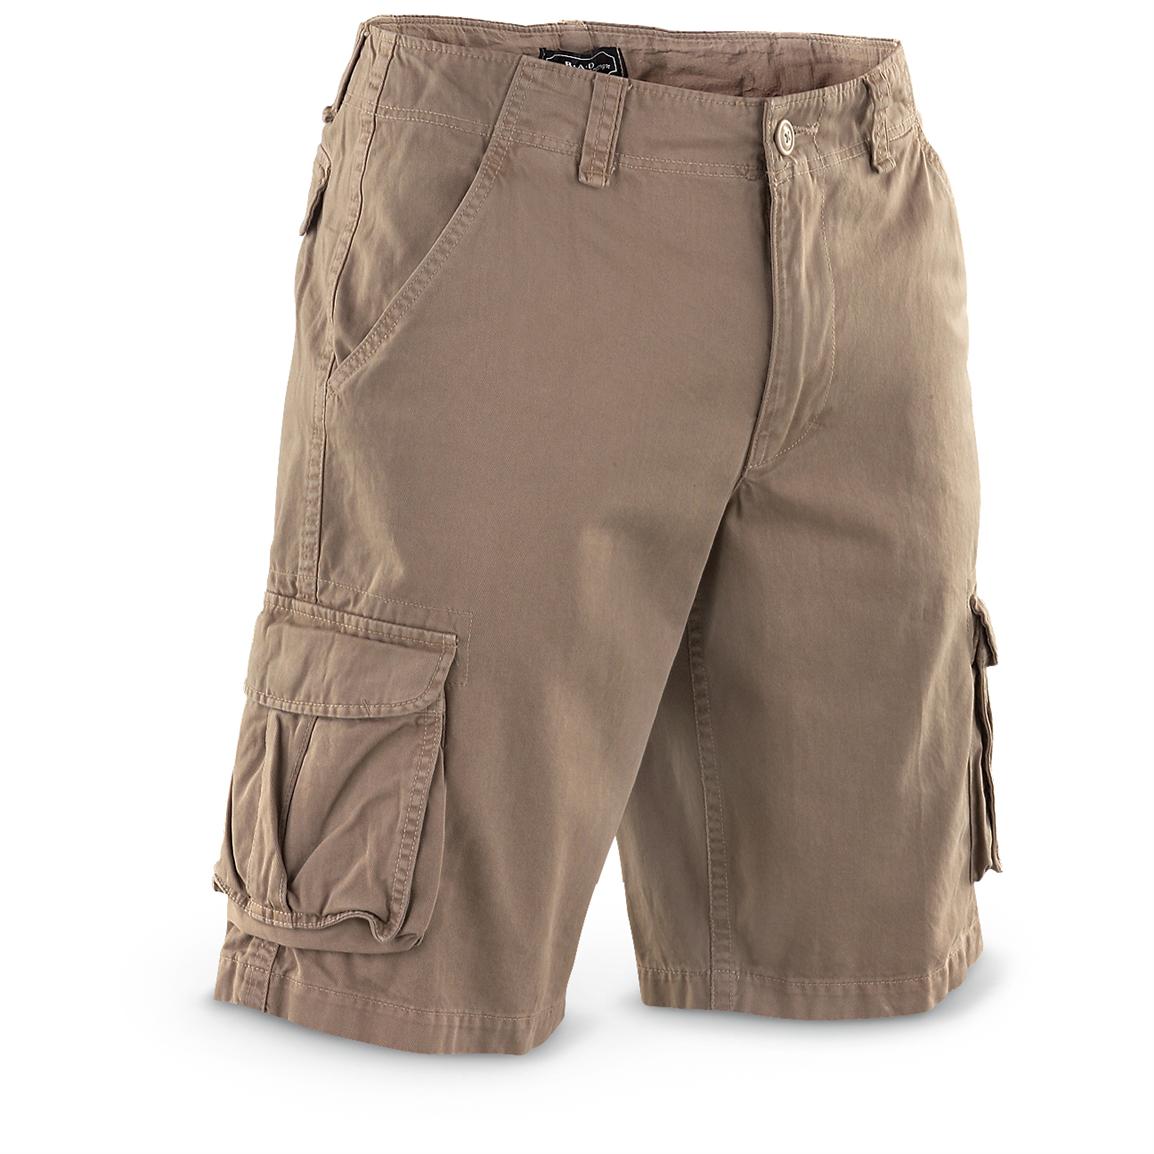 Cotton Twill Cargo Shorts - 203604, Shorts at Sportsman's Guide